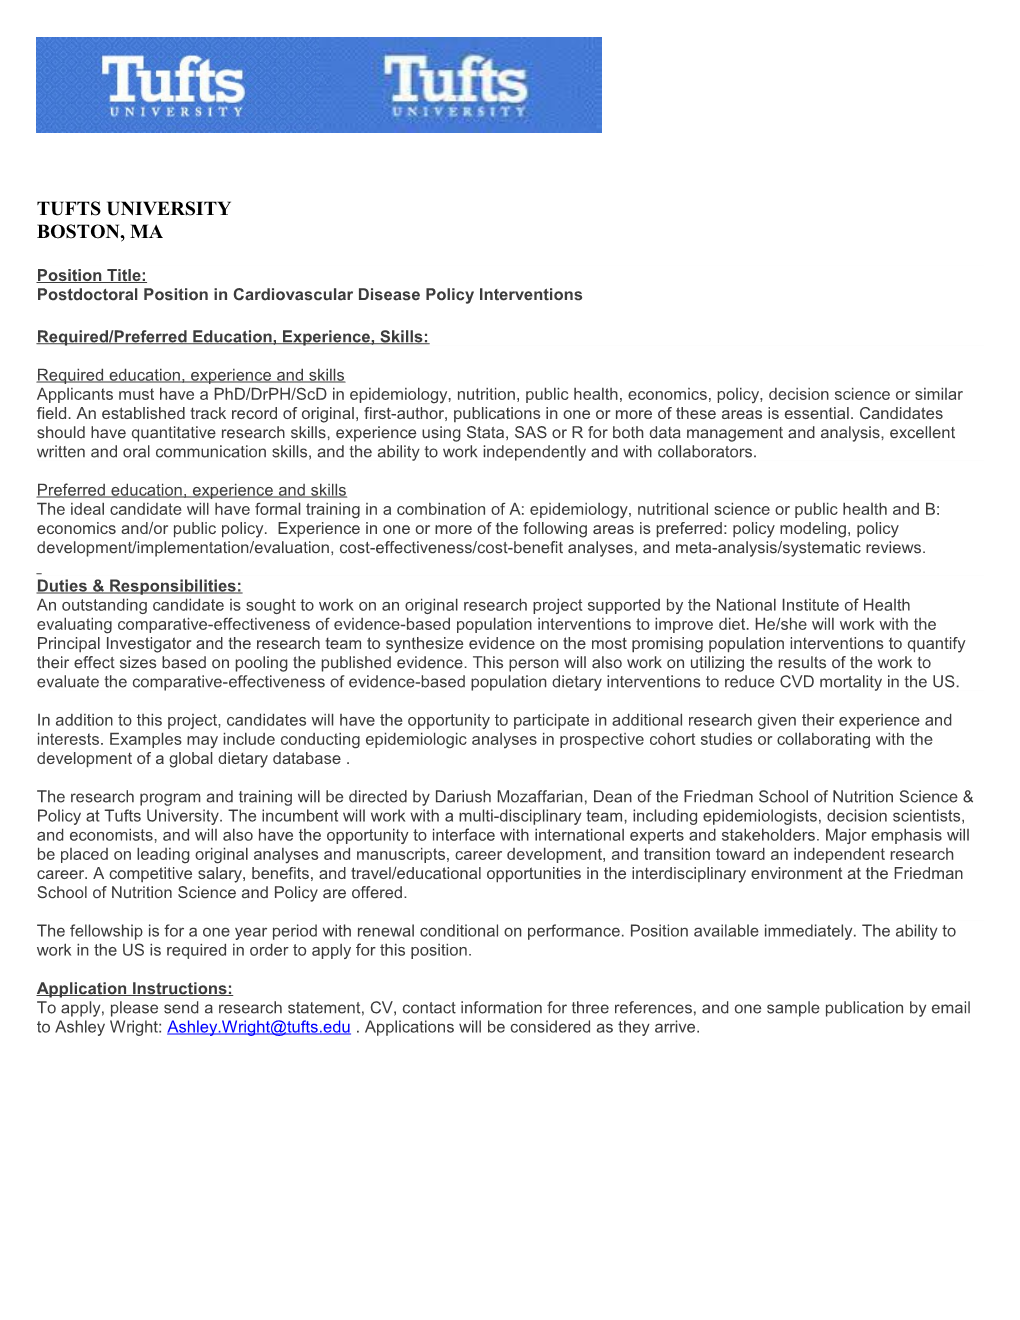 Postdoctoral Position in Cardiovascular Disease Policy Interventions